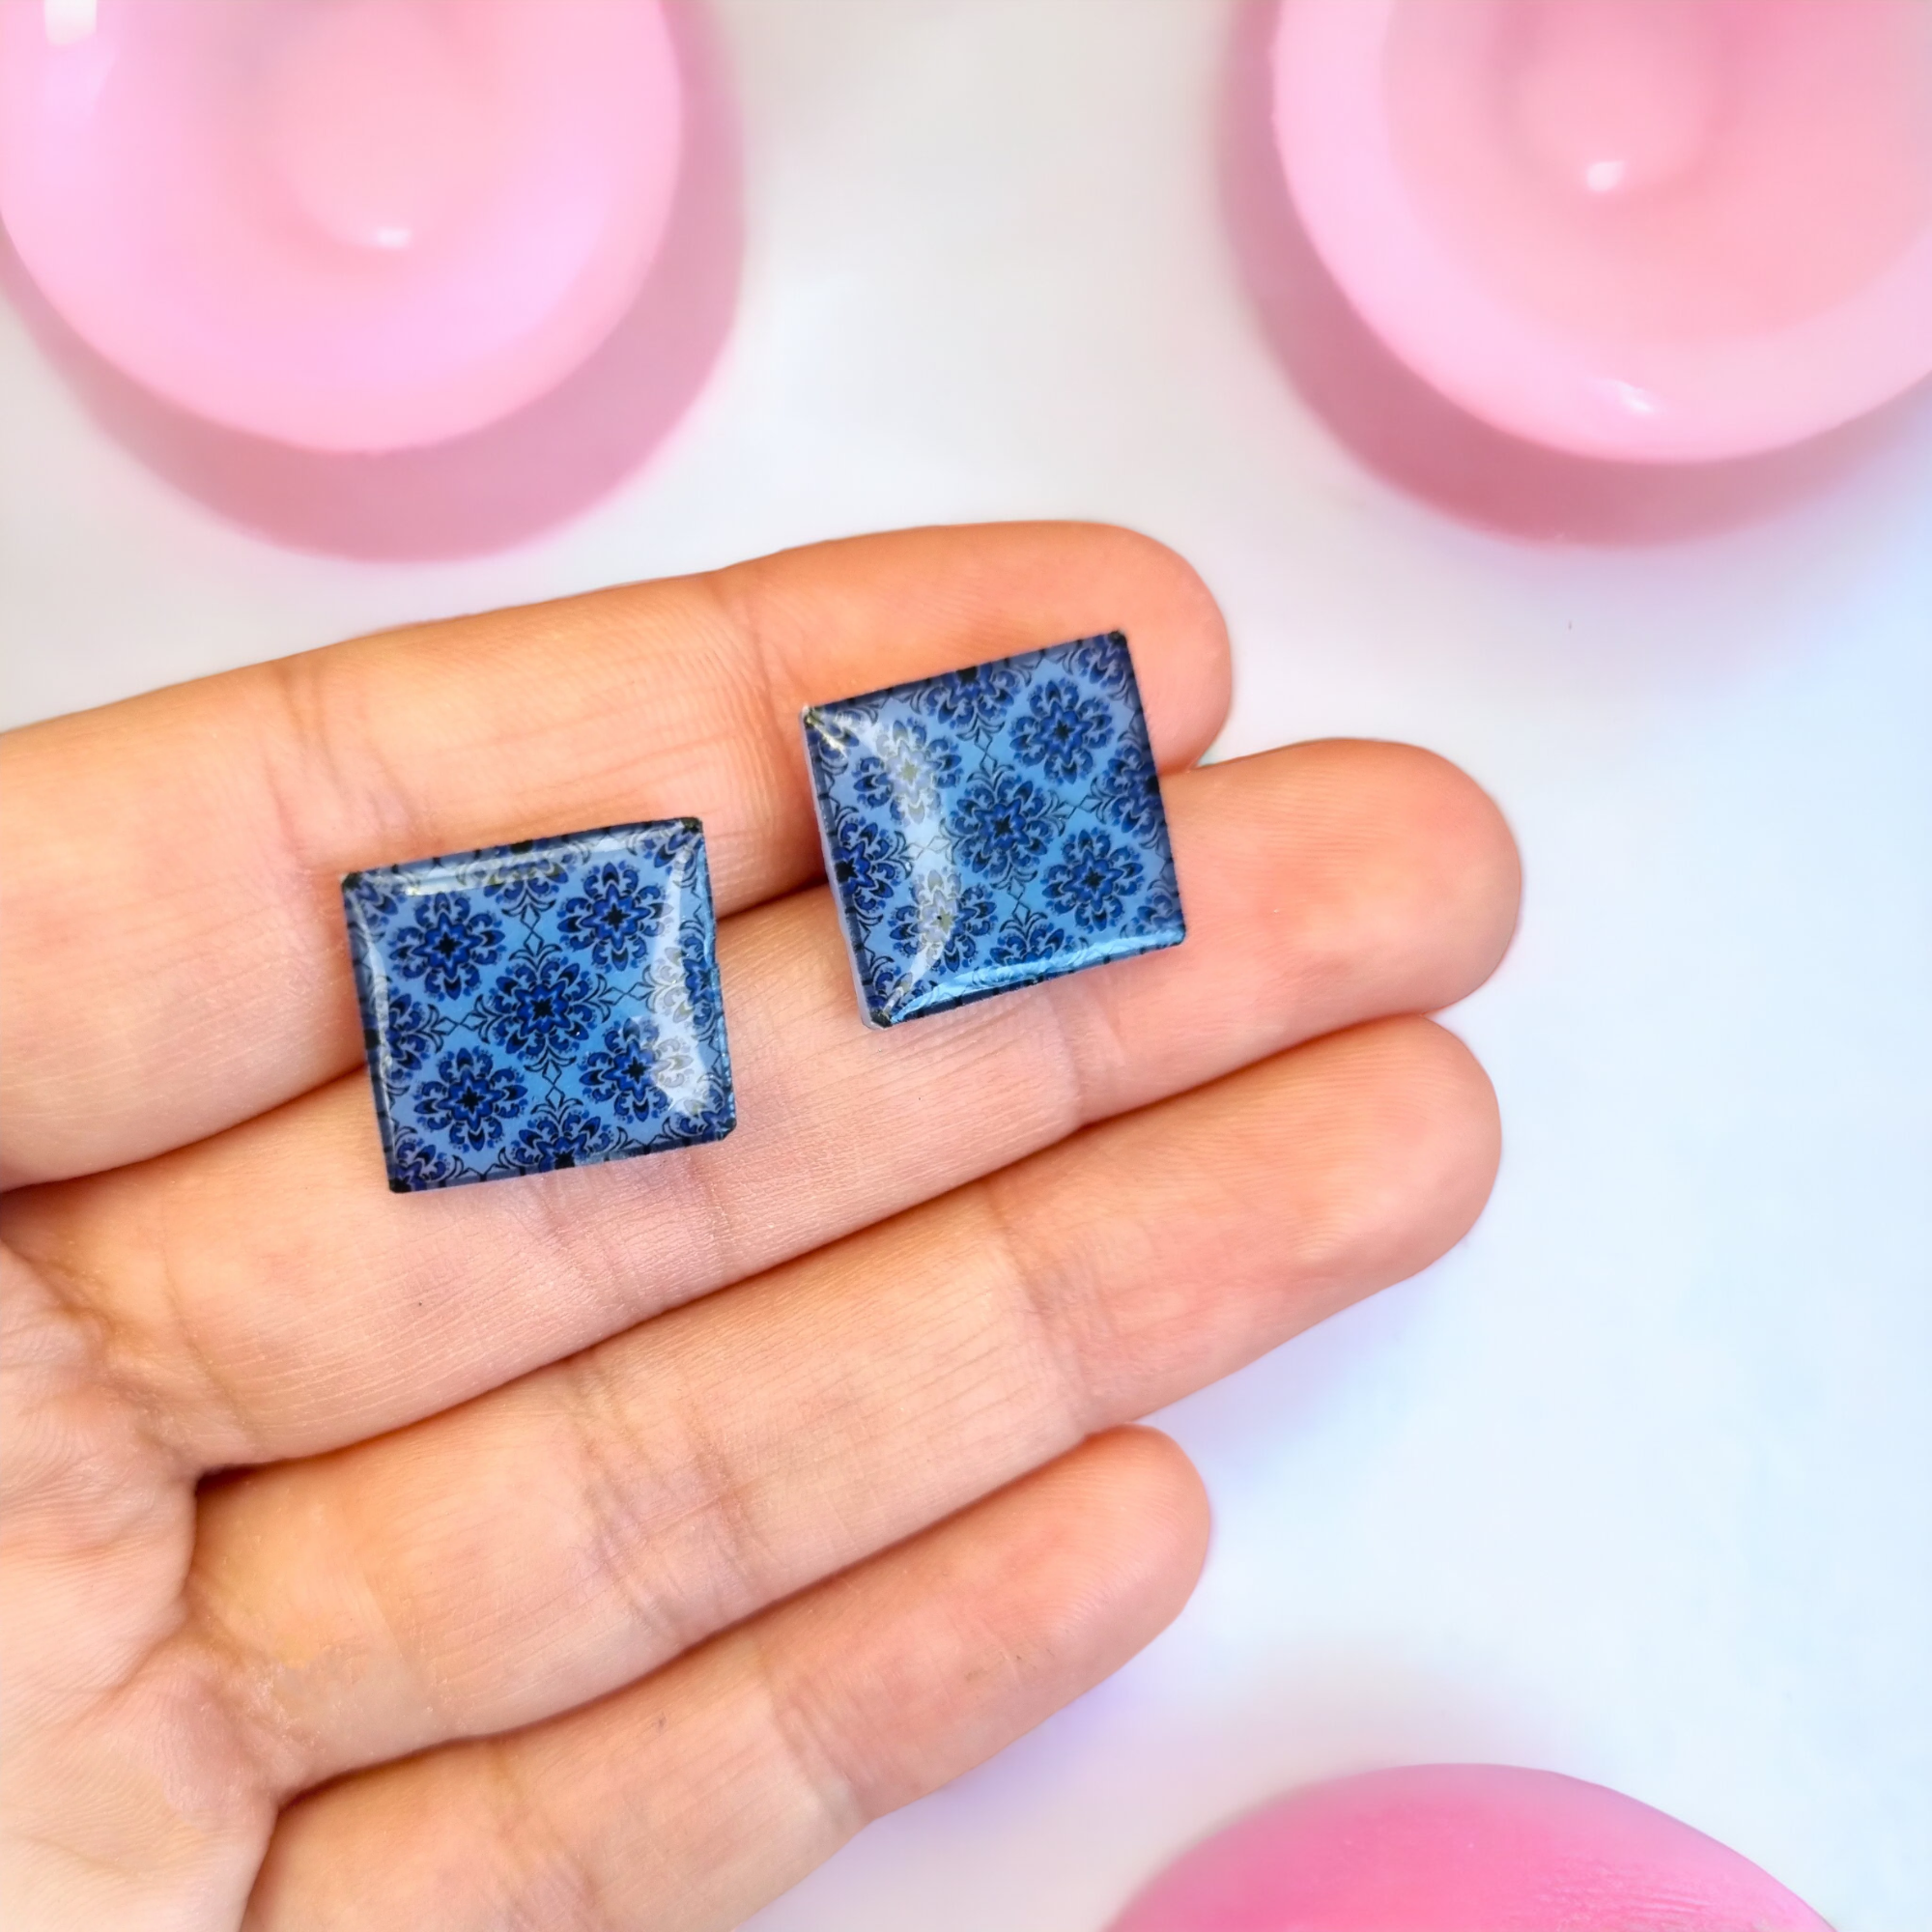 Moroccan Mosaic Inspired Square Stud Earrings